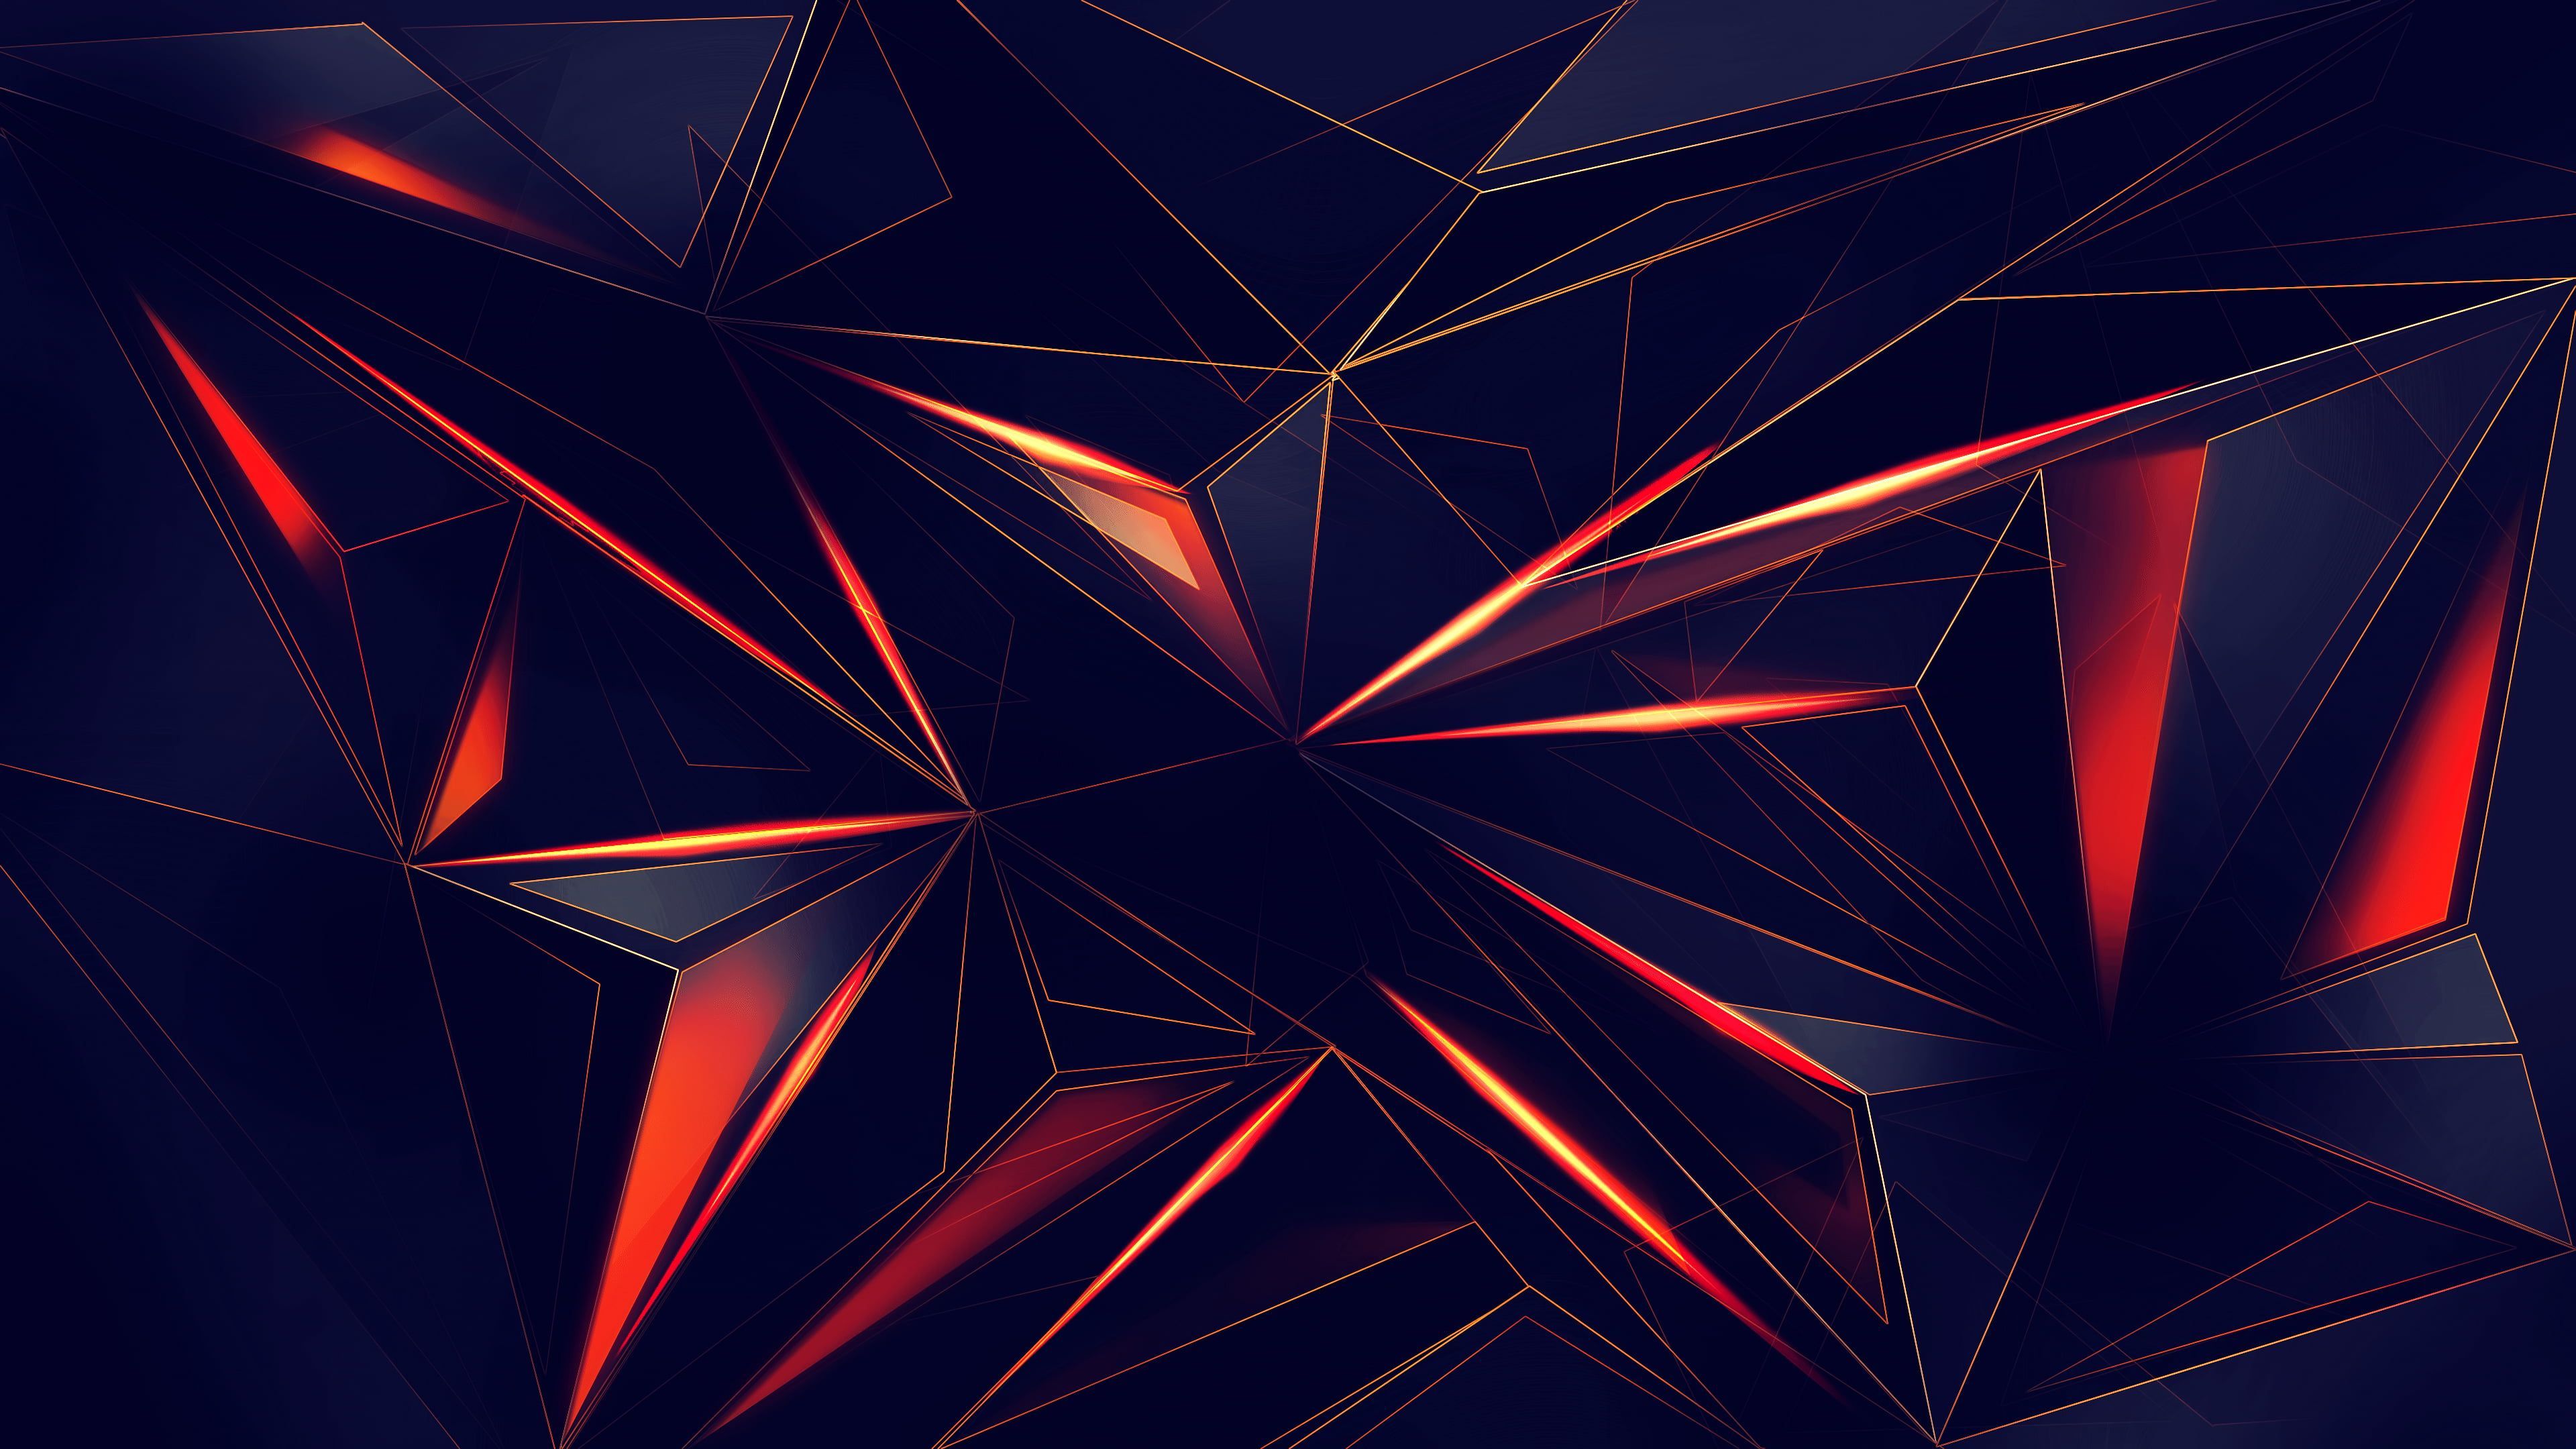 red and blue digital wallpaper #abstract digital art 3D Abstract #lines K #wallpaper #hdwallpaper #desktop. Digital wallpaper, Abstract wallpaper, Abstract